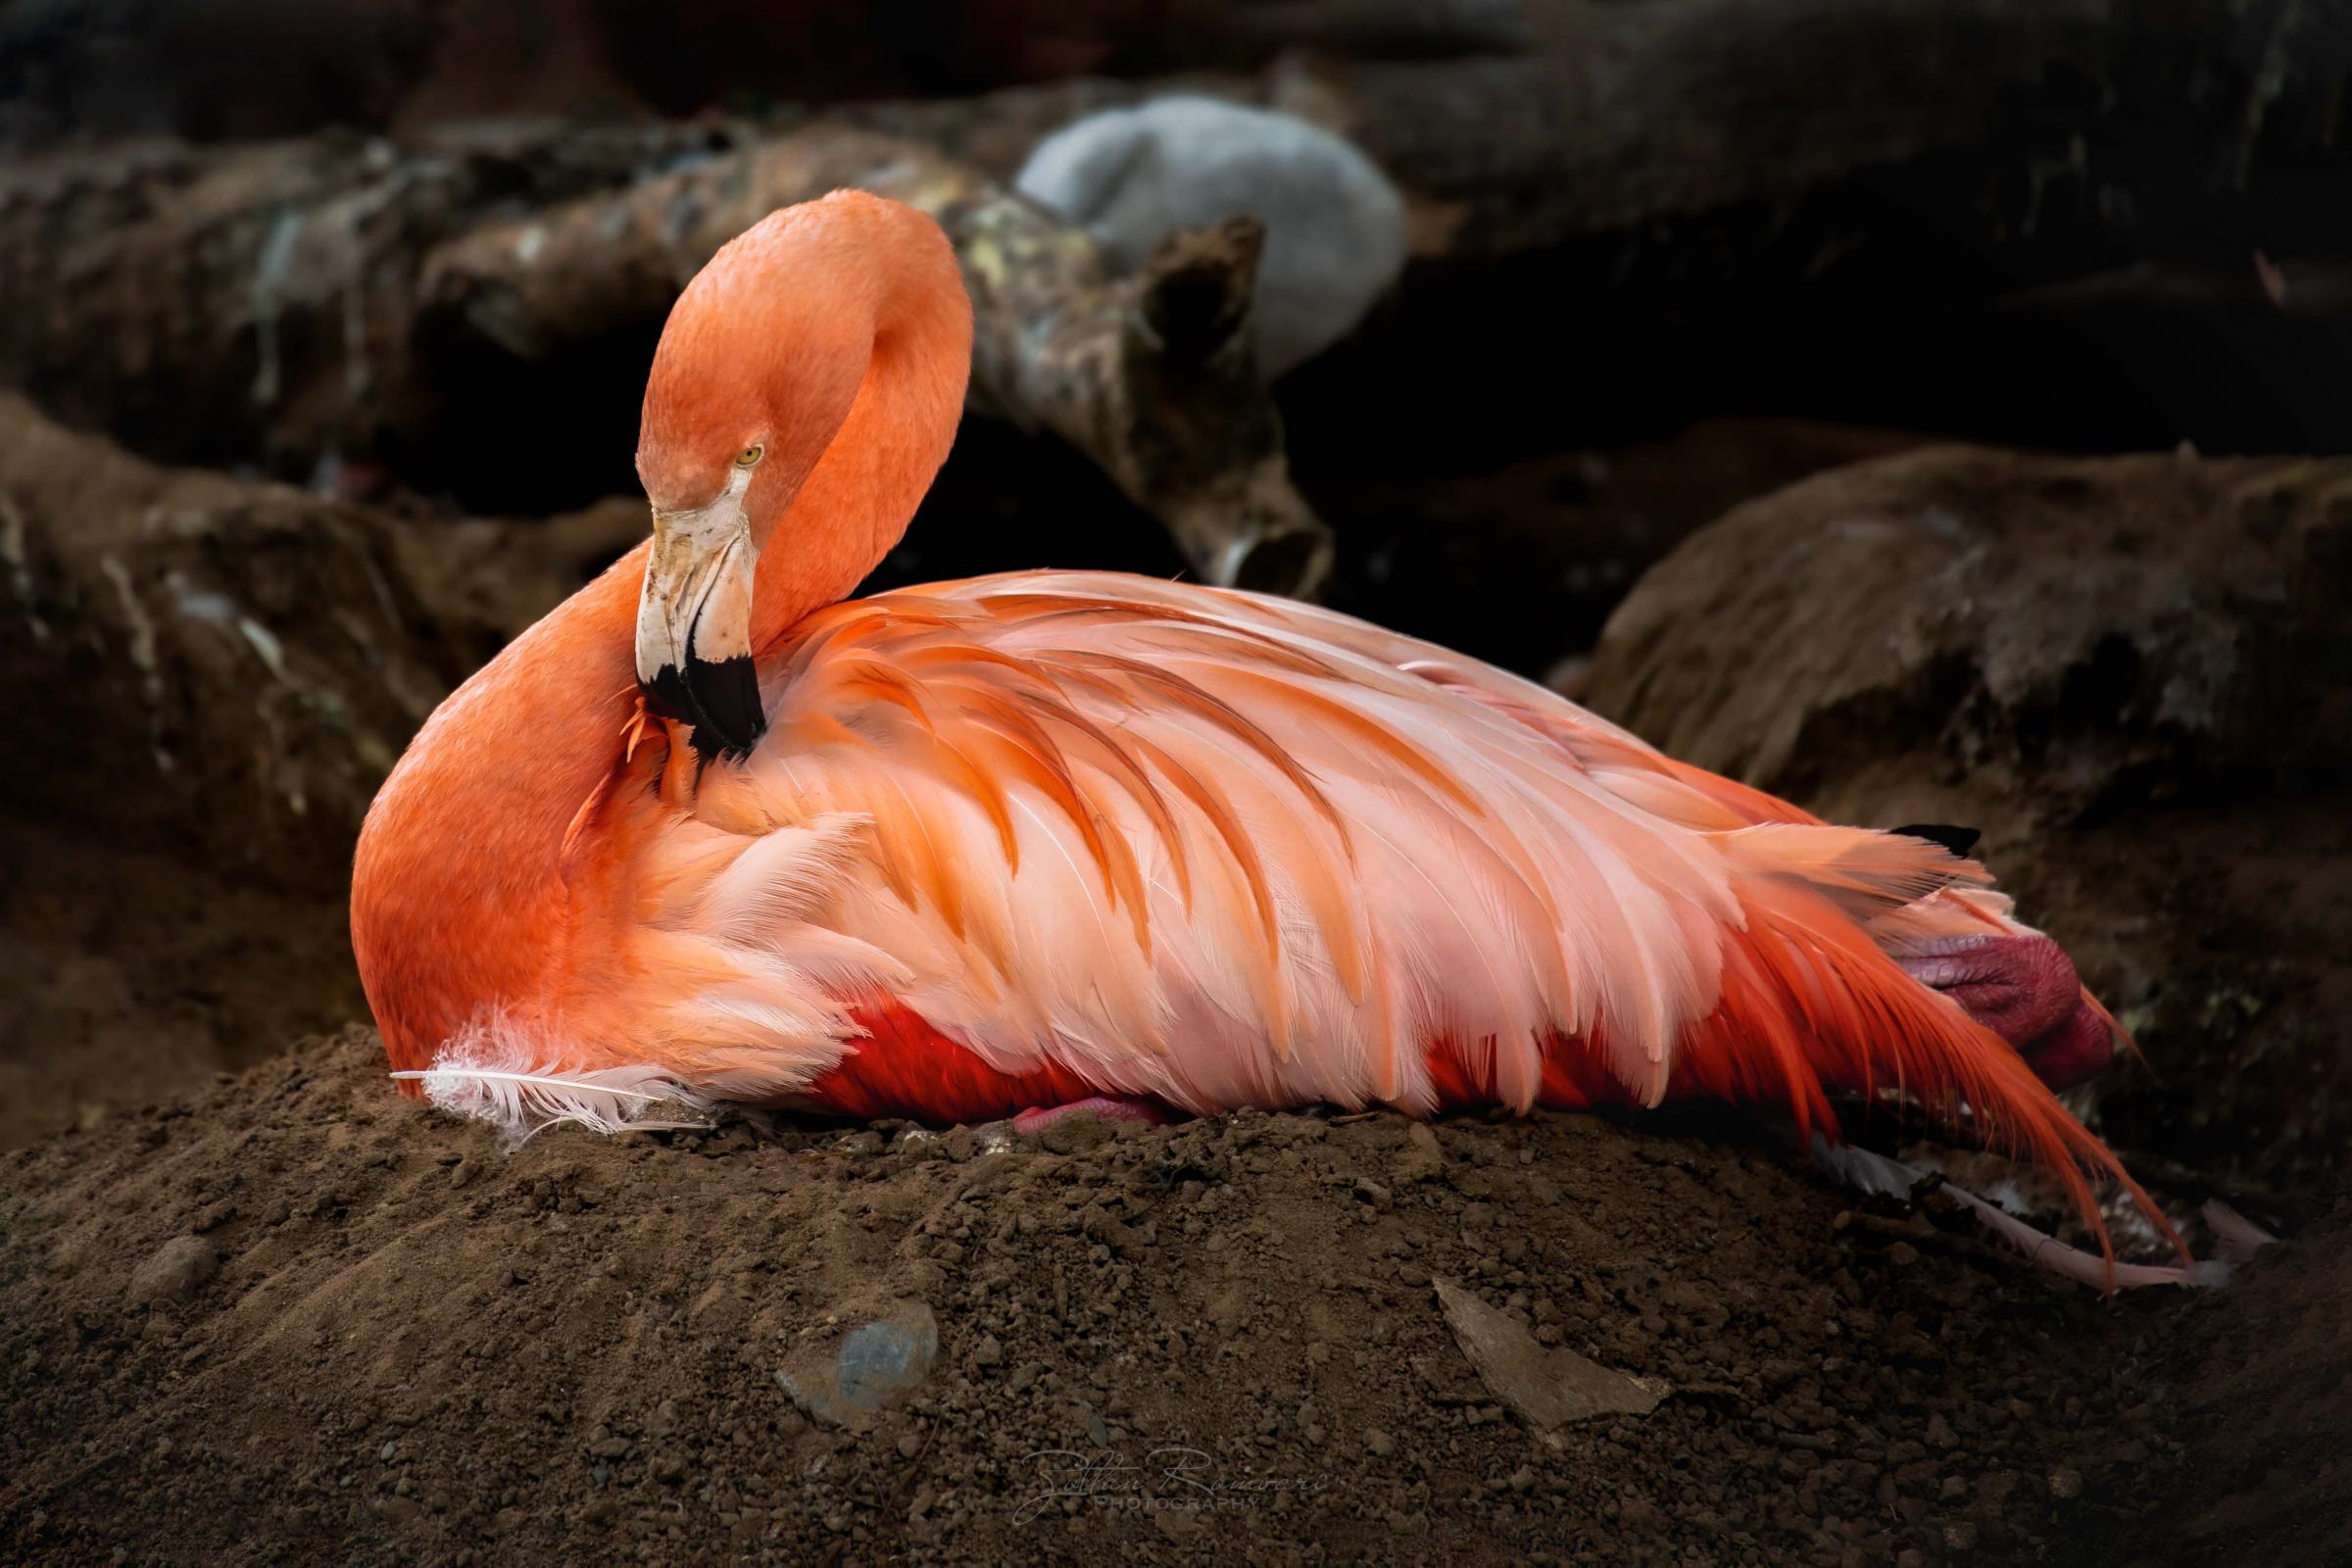 Flamingo at Chester Zoo - This years exhibition photo in Chicago